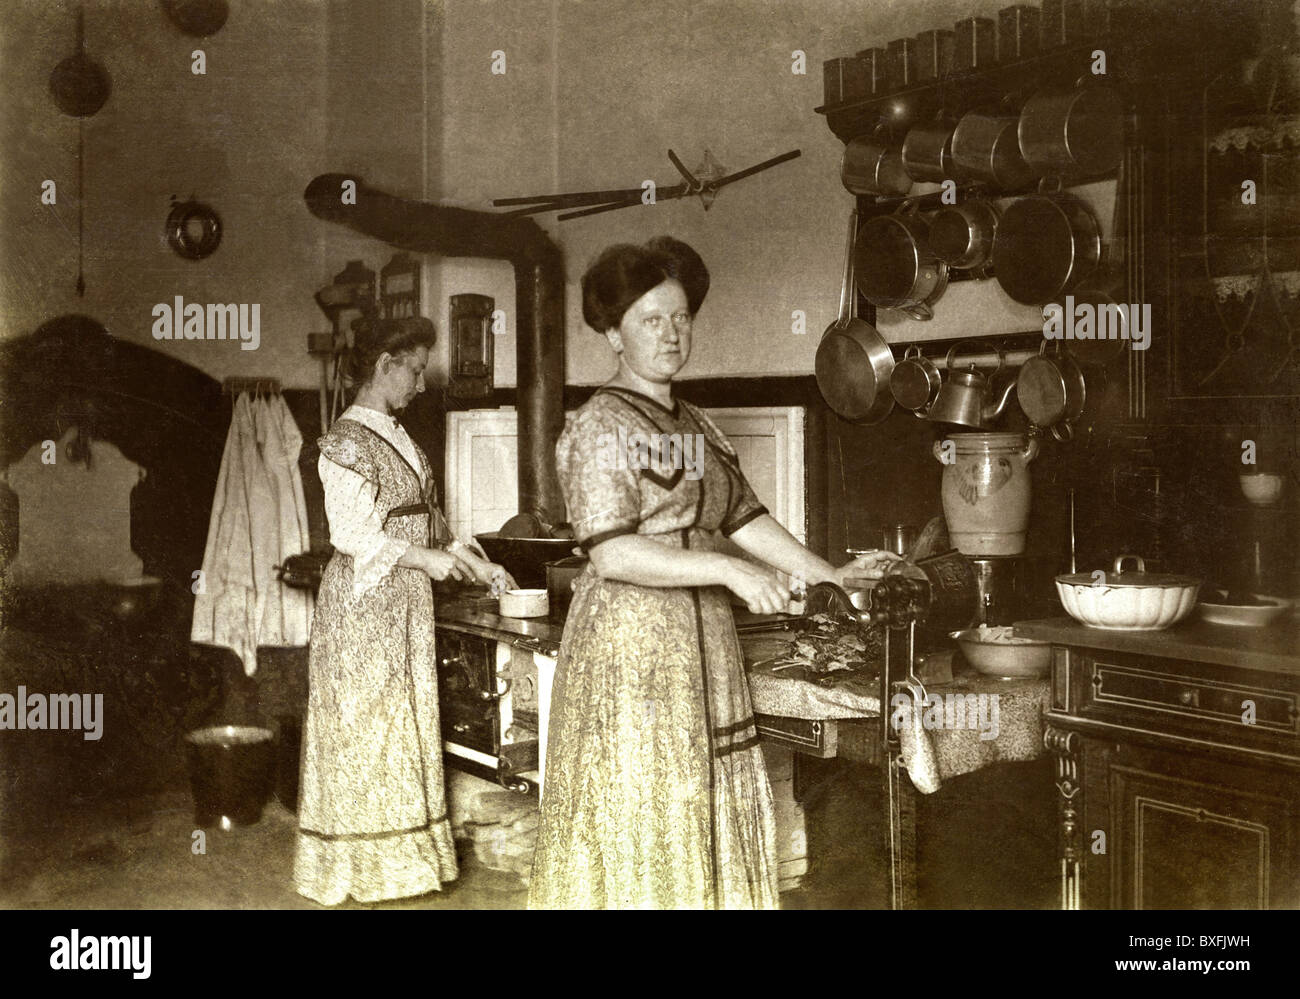 people, women, cooky in kitchen, Bavaria, 1911, Additional-Rights-Clearences-Not Available Stock Photo